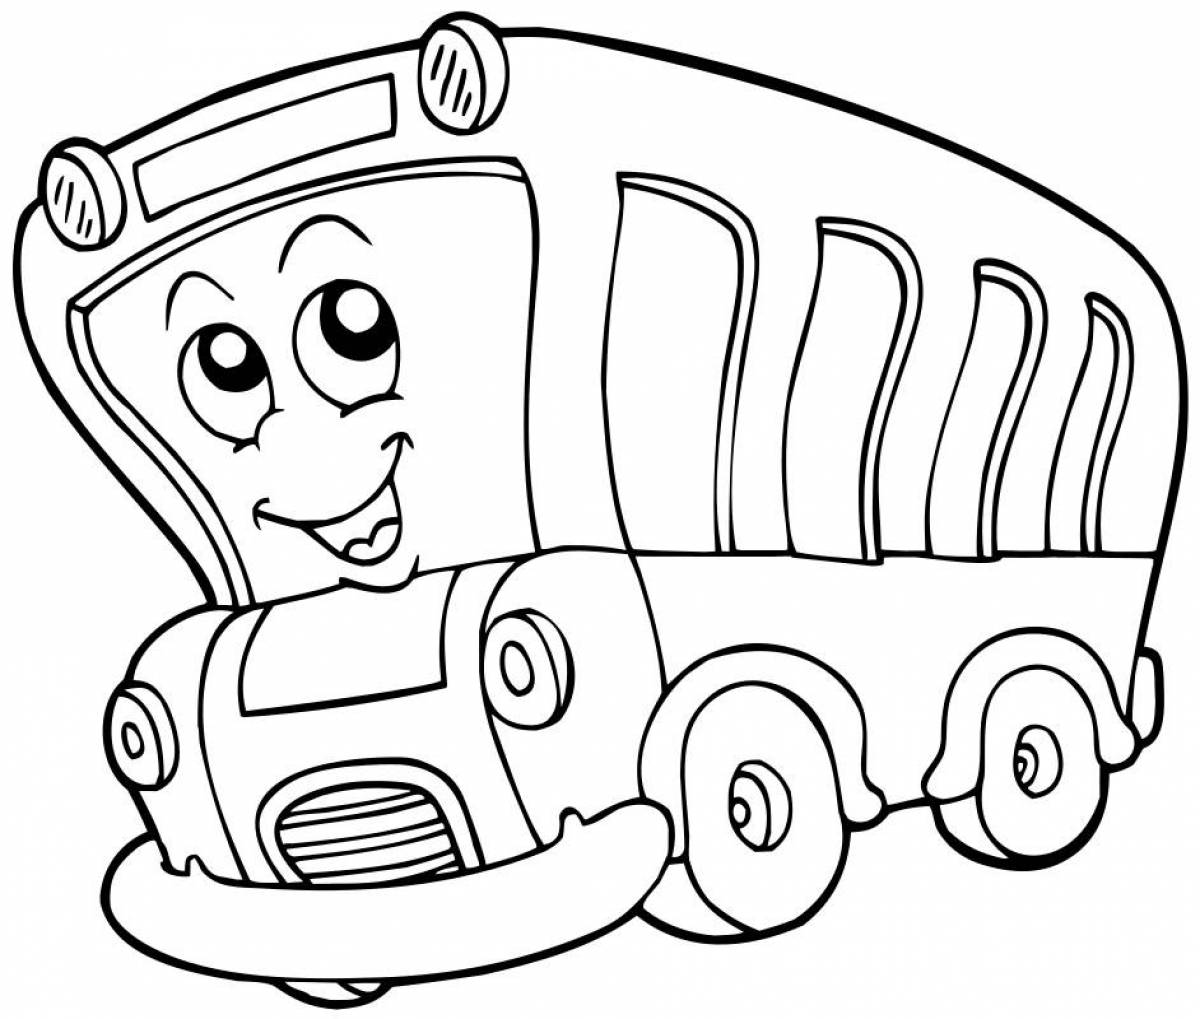 Wonderful coloring bus for babies